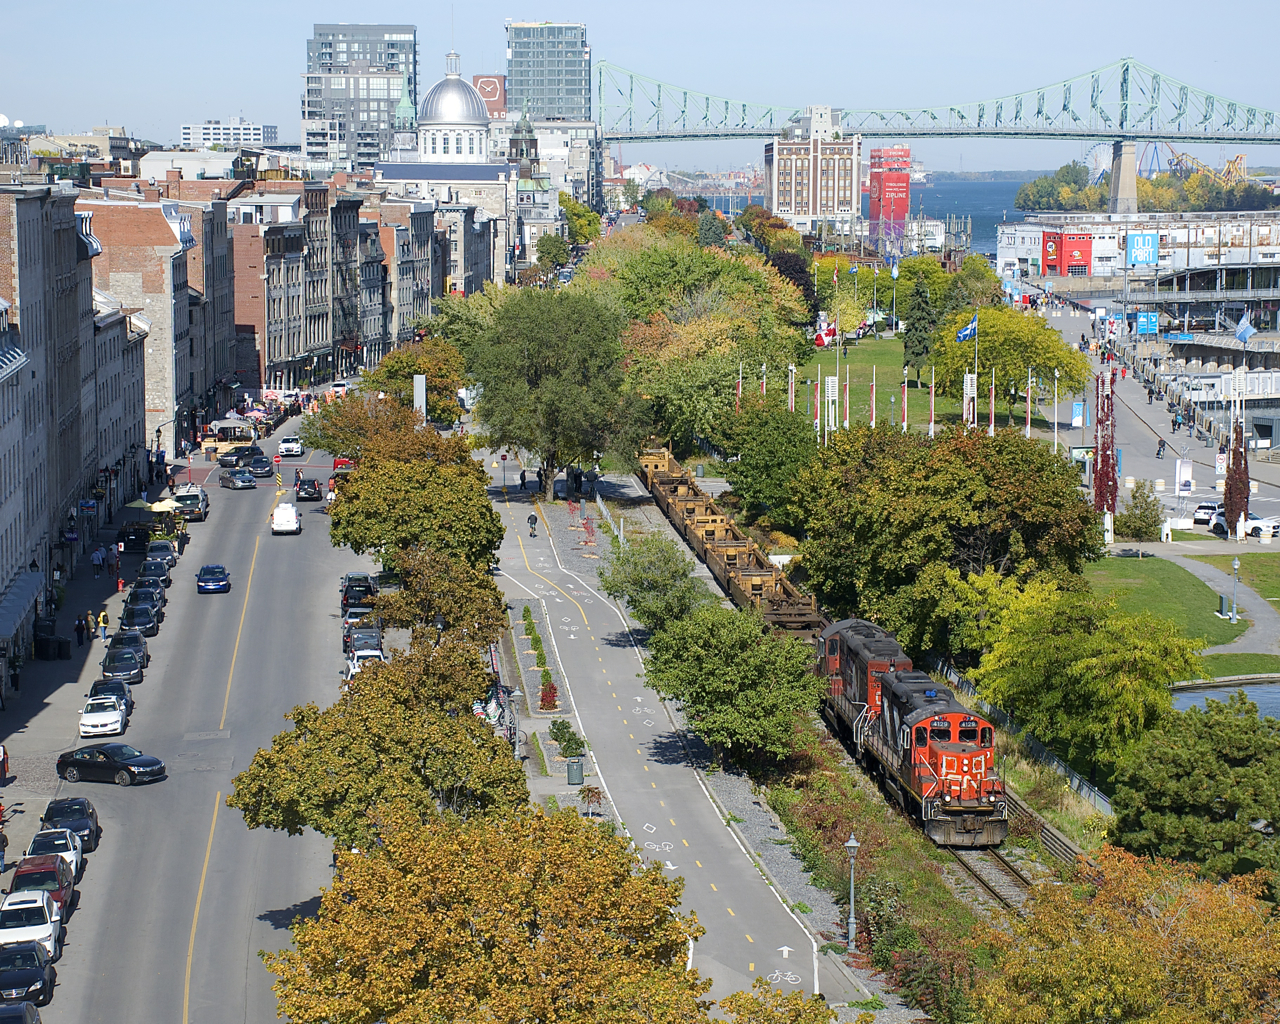 A CN transfer powered by CN 4129 & CN 7229 is exiting the Port of Montreal, with well cars up front and mixed freight out of sight further back. Paralleling the CN Wharf Spur here is a bike path and De la Commune Street.